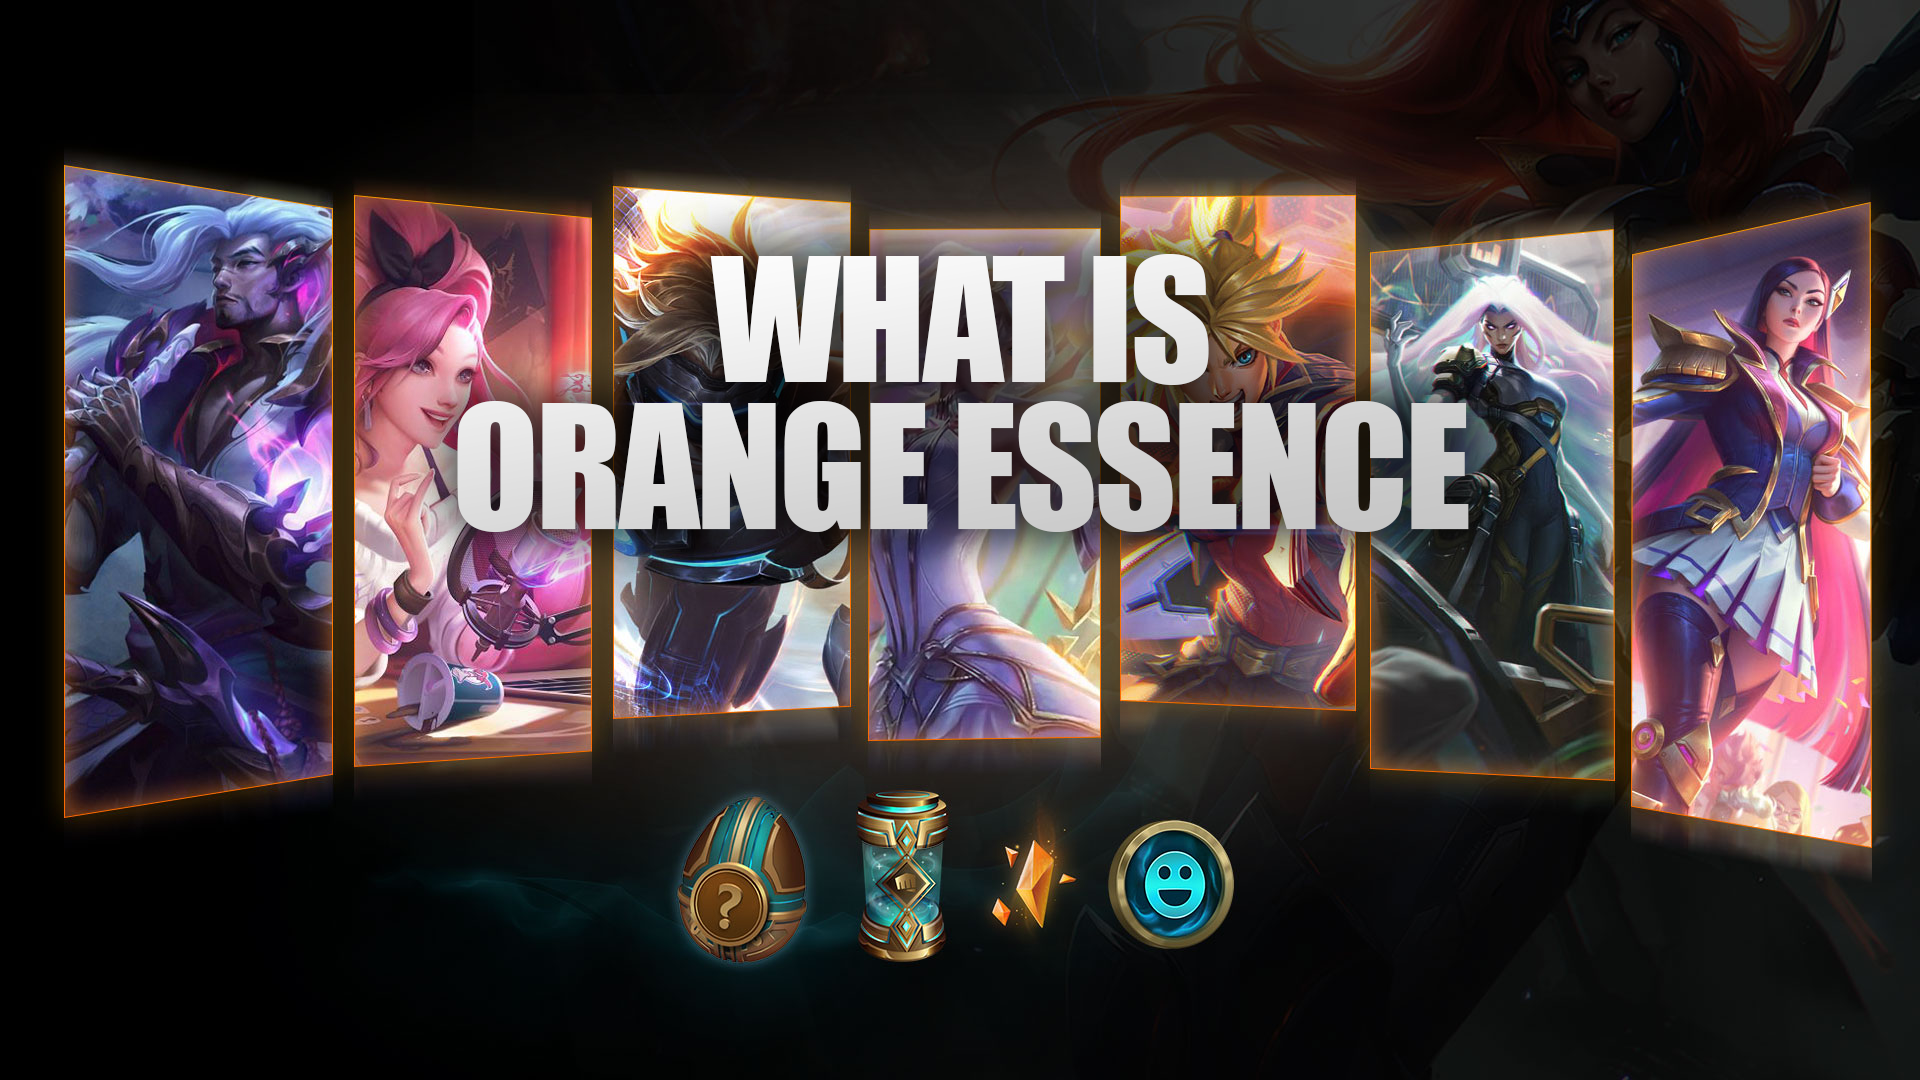 Orange Essence is a special crafting material in League of Legends. It is used to craft various in-game cosmetic items like skins, wards, emotes, and even summoner icons.